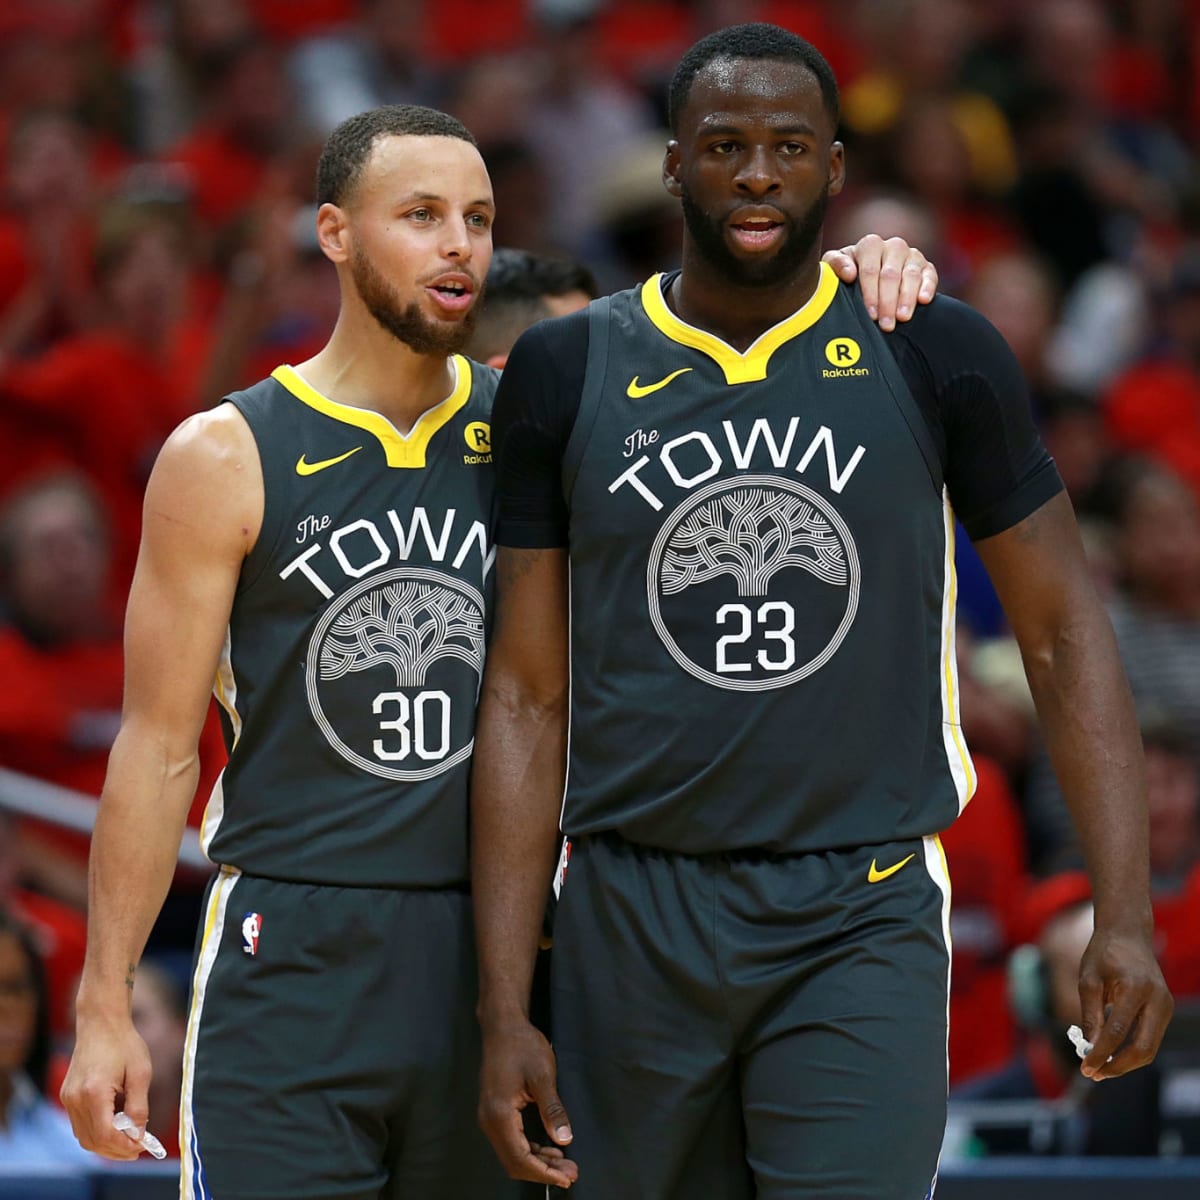 Stephen Curry and Draymond Green of the Golden State Warriors share feedback on the court (photo by Sean Gardner/Getty Images).